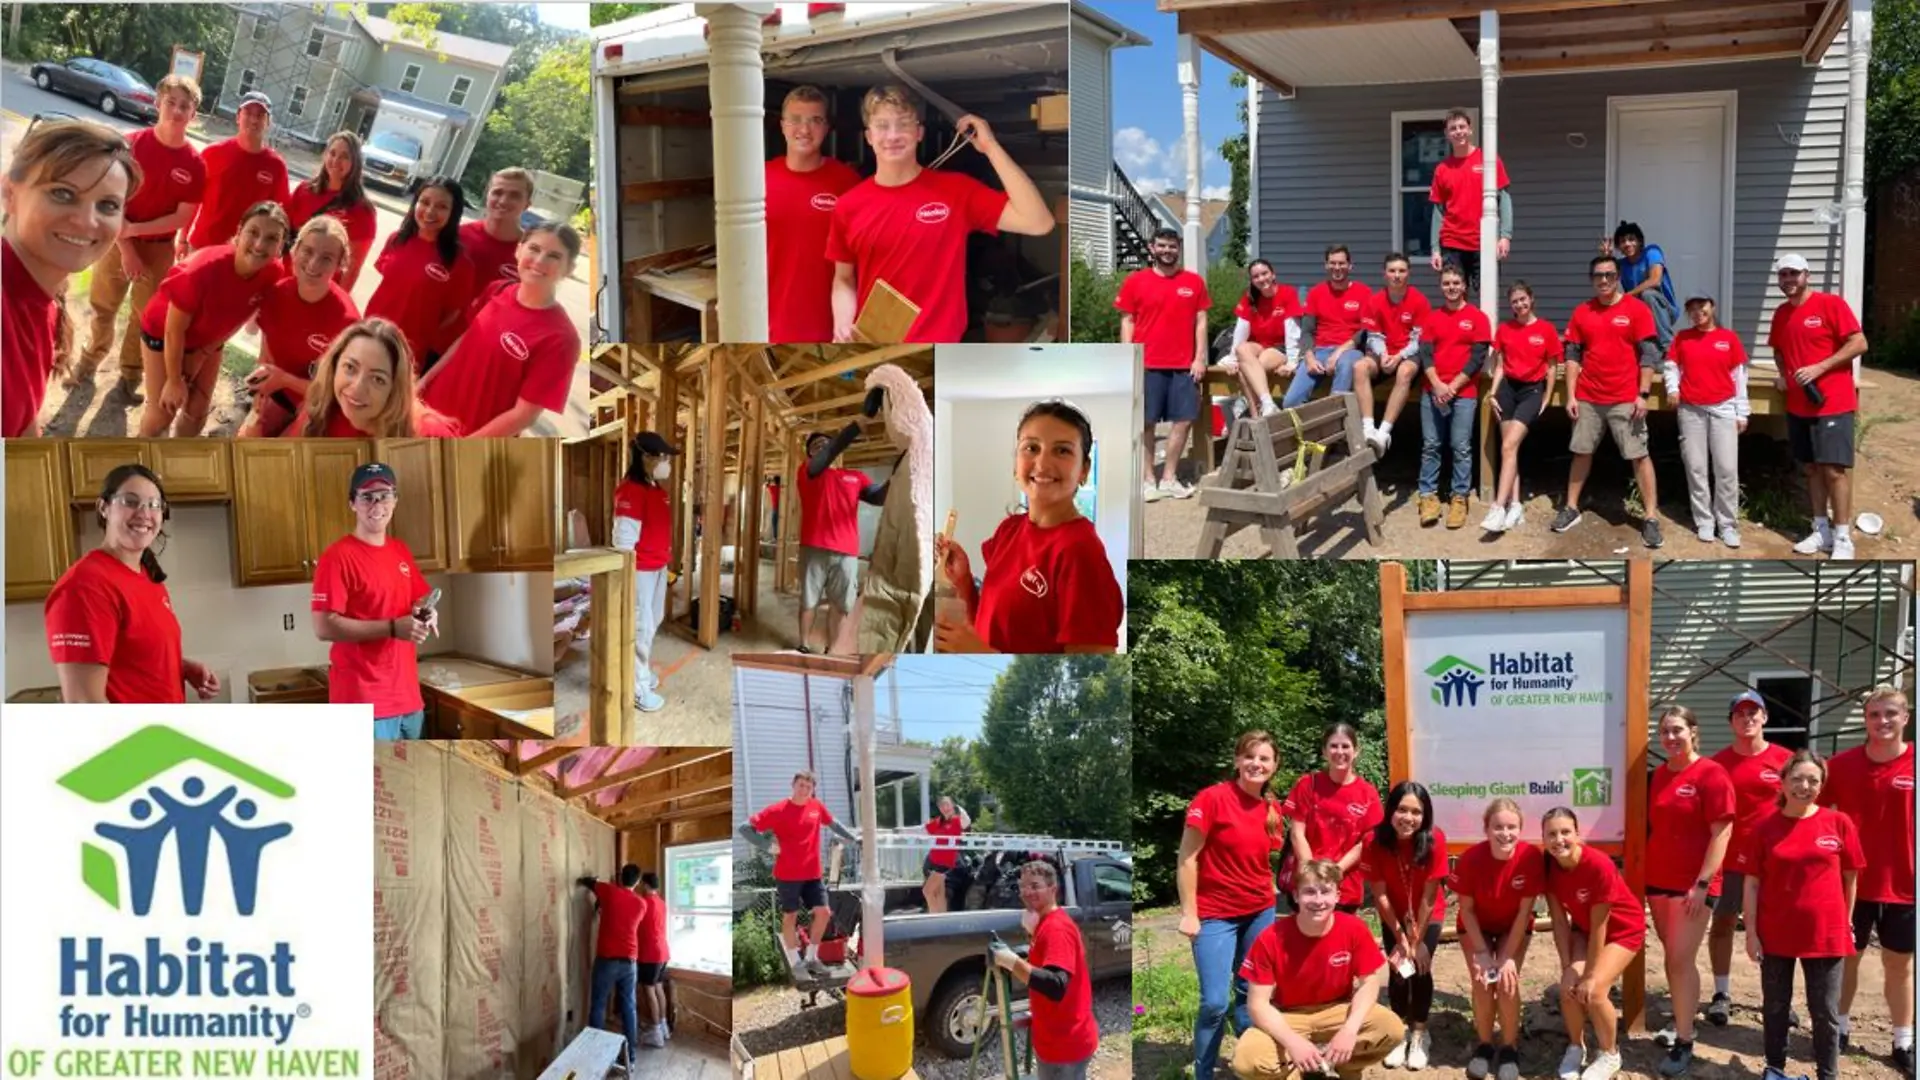 Collage of multiple photos showing employees working on a house construction project